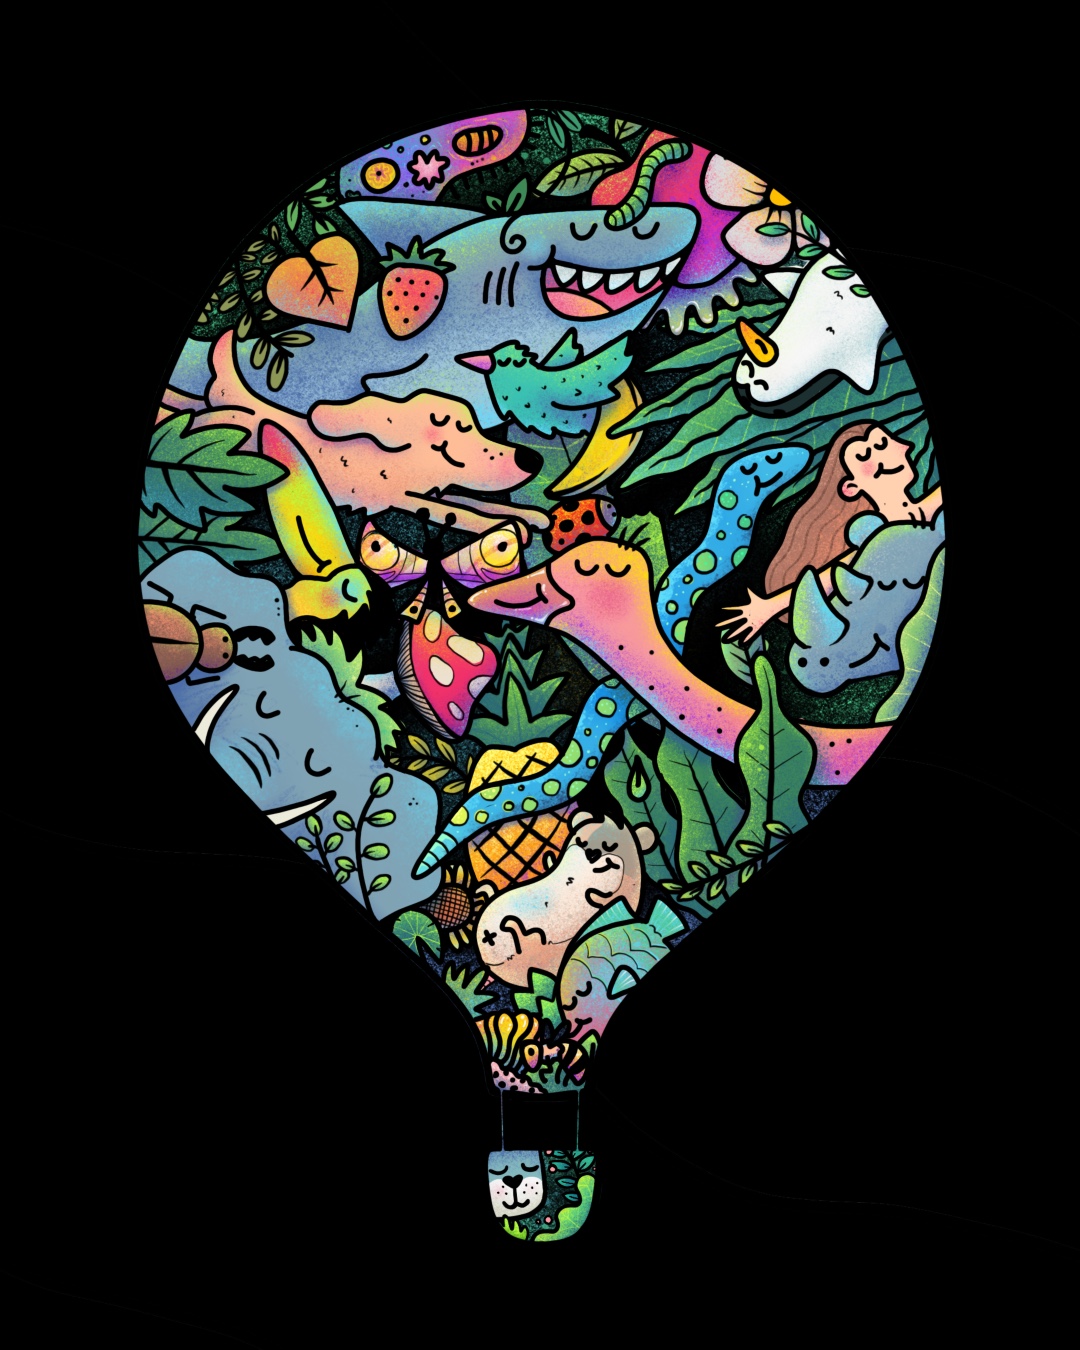 Balloon of life, animals, and nature